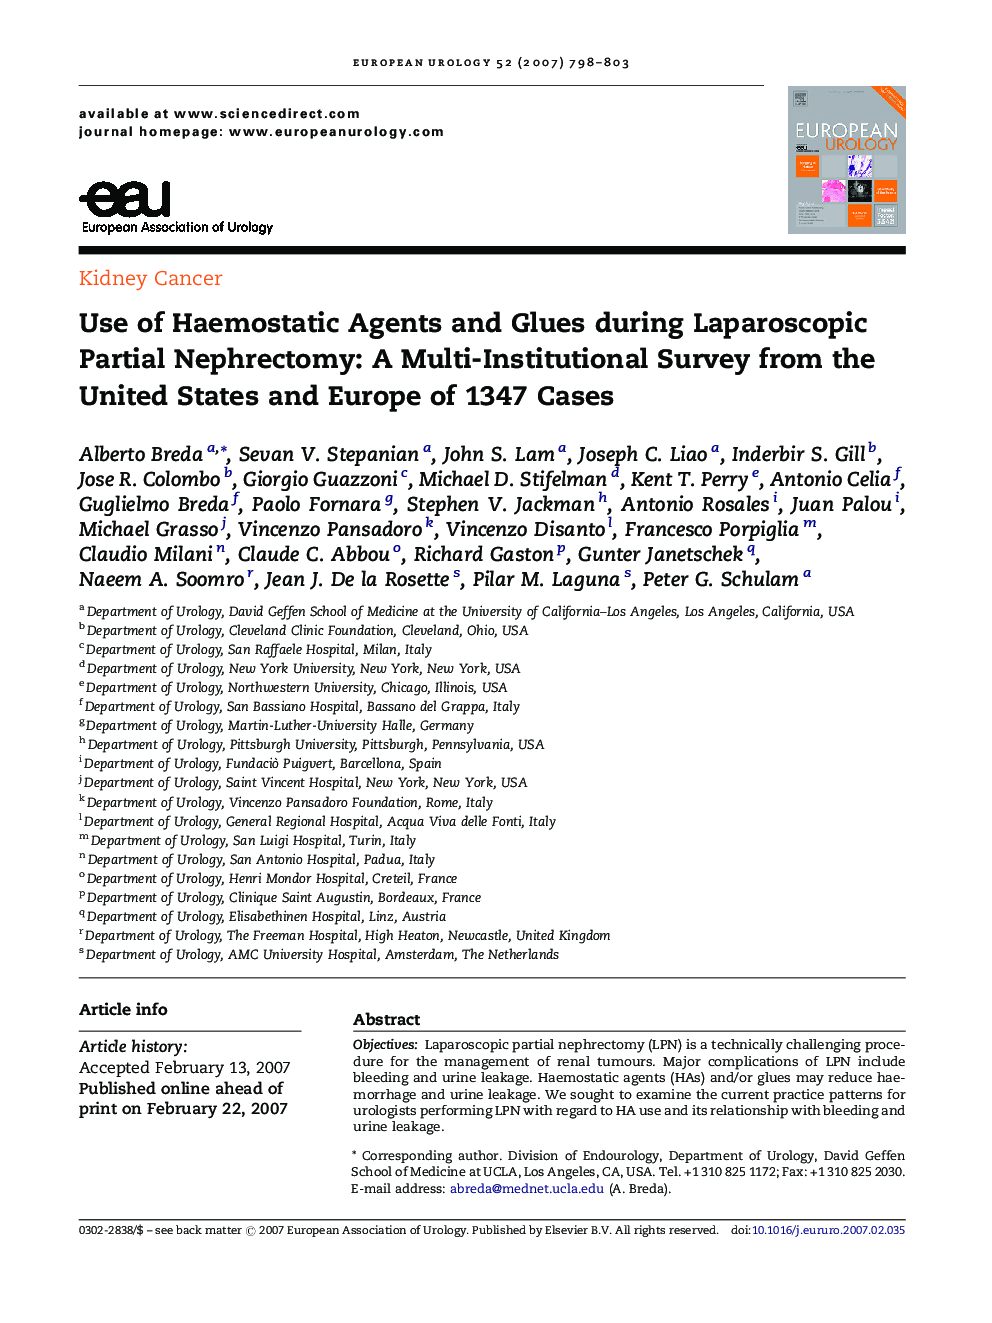 Use of Haemostatic Agents and Glues during Laparoscopic Partial Nephrectomy: A Multi-Institutional Survey from the United States and Europe of 1347 Cases 